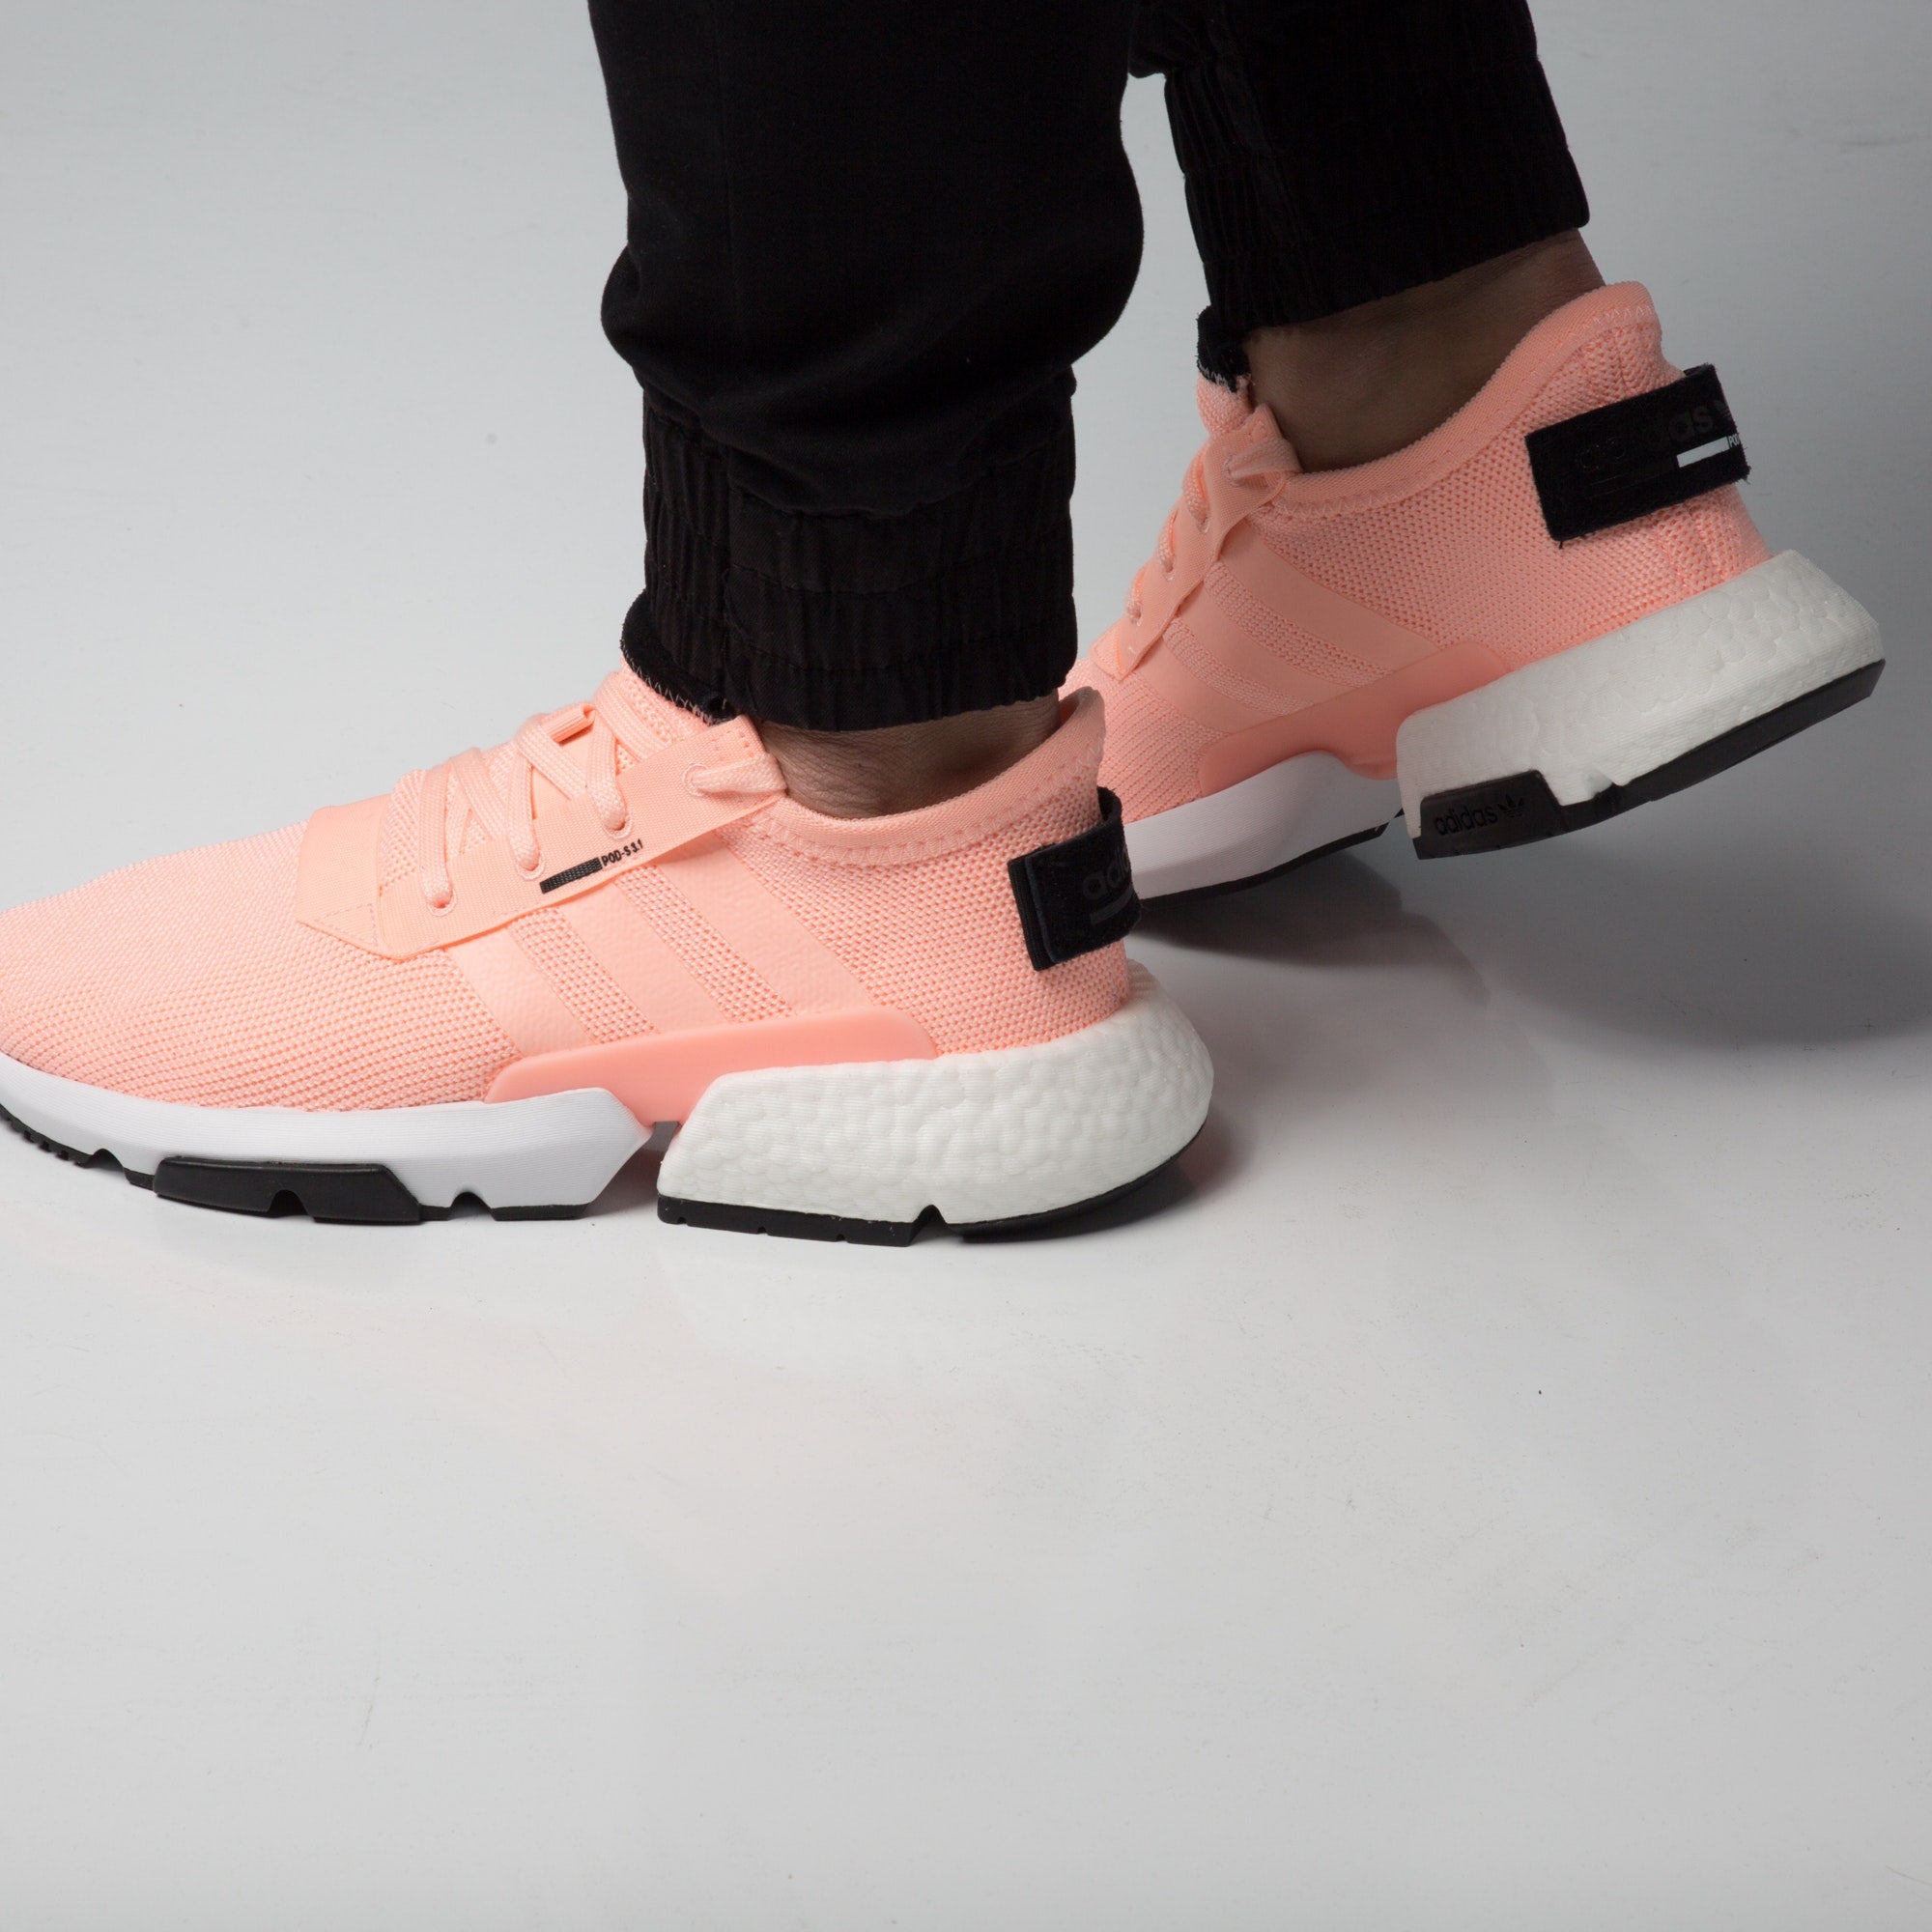 Adidas POD-S3.1 Pink | Culture Kings